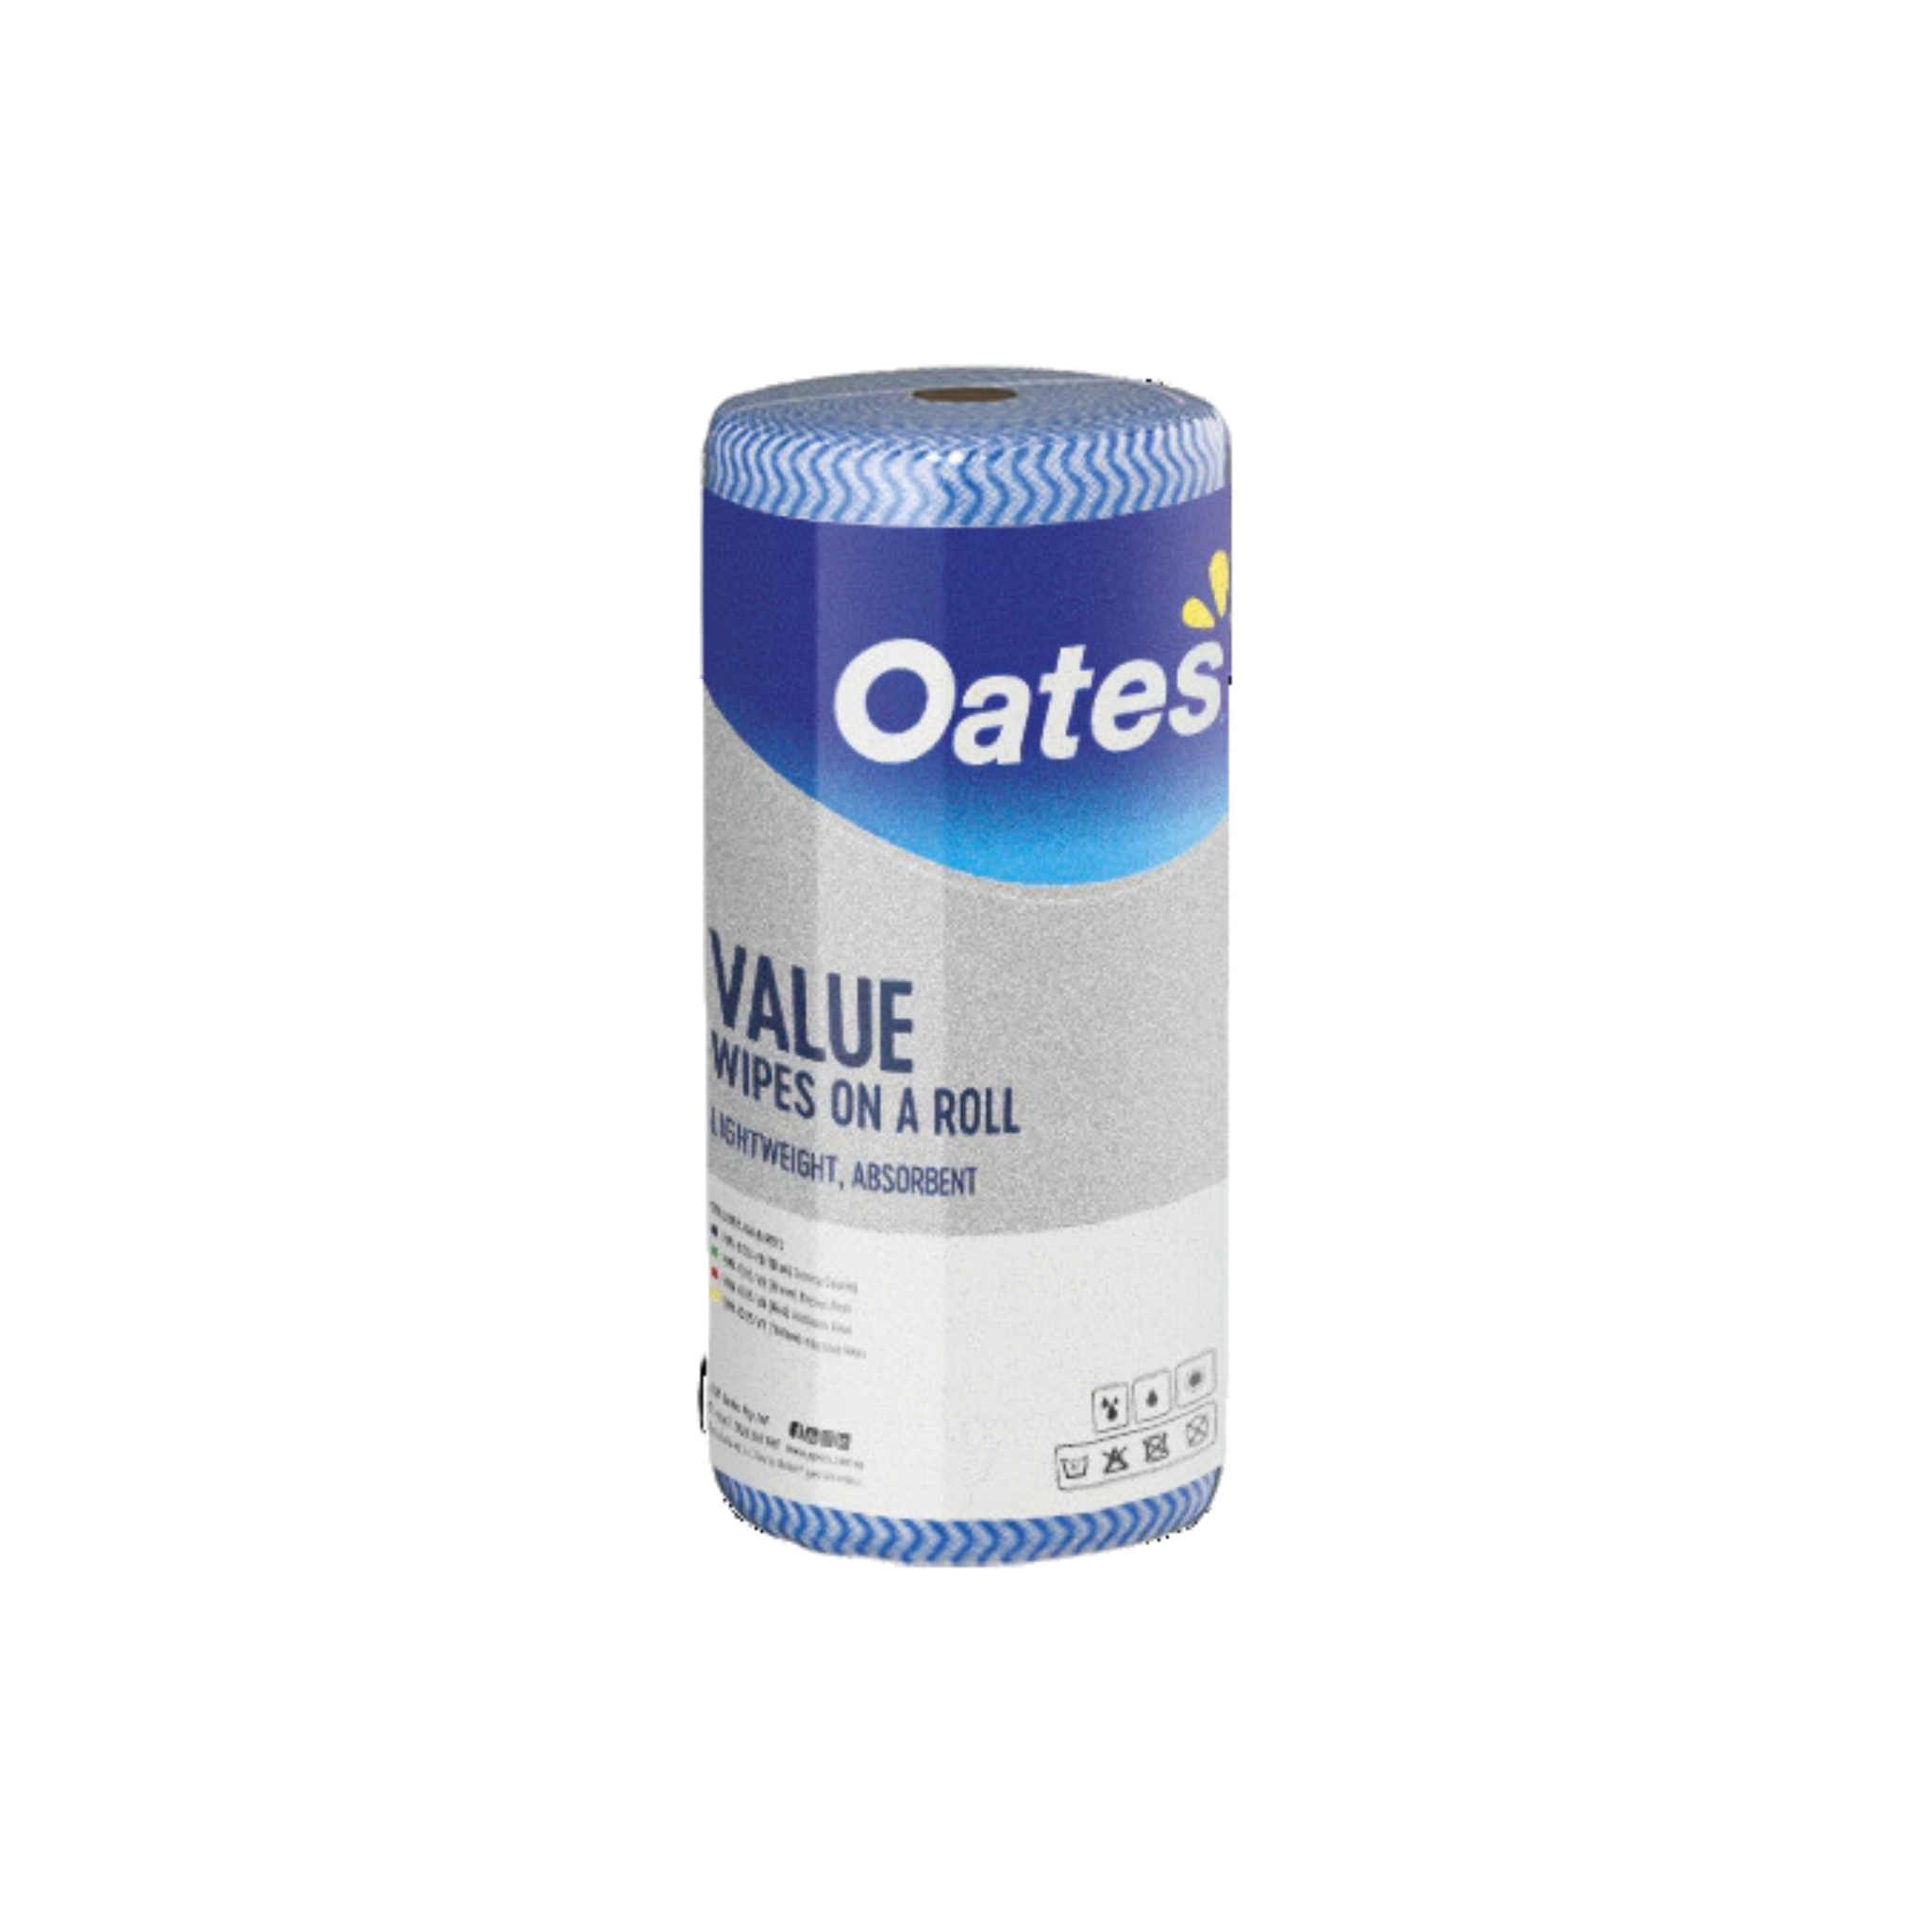 Oates Value Wipes Roll 45m - Blue